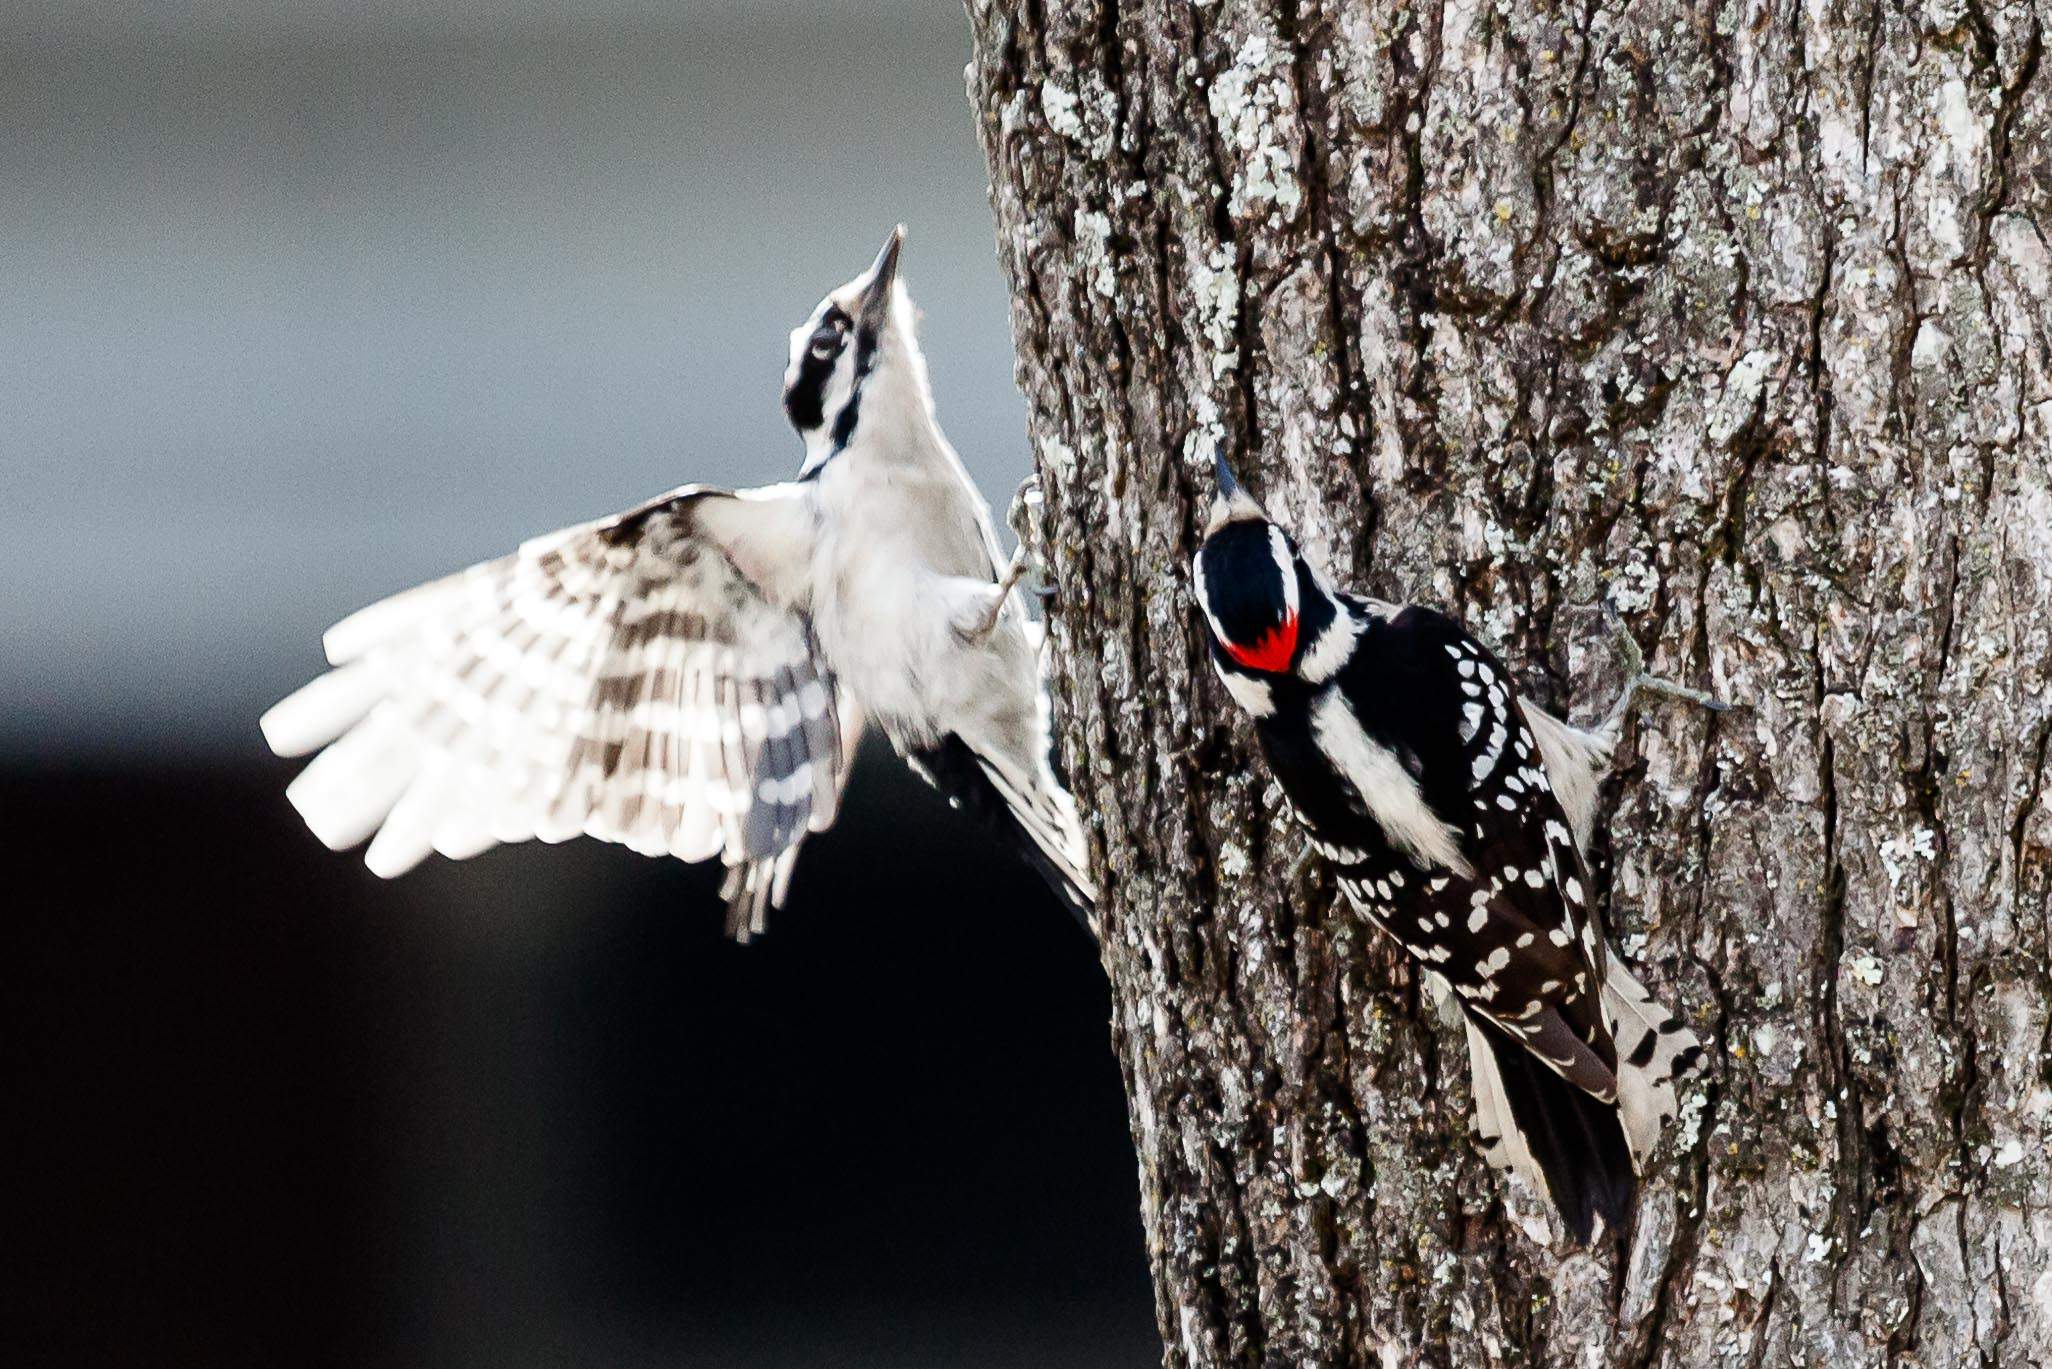 female and male downy woodpecker